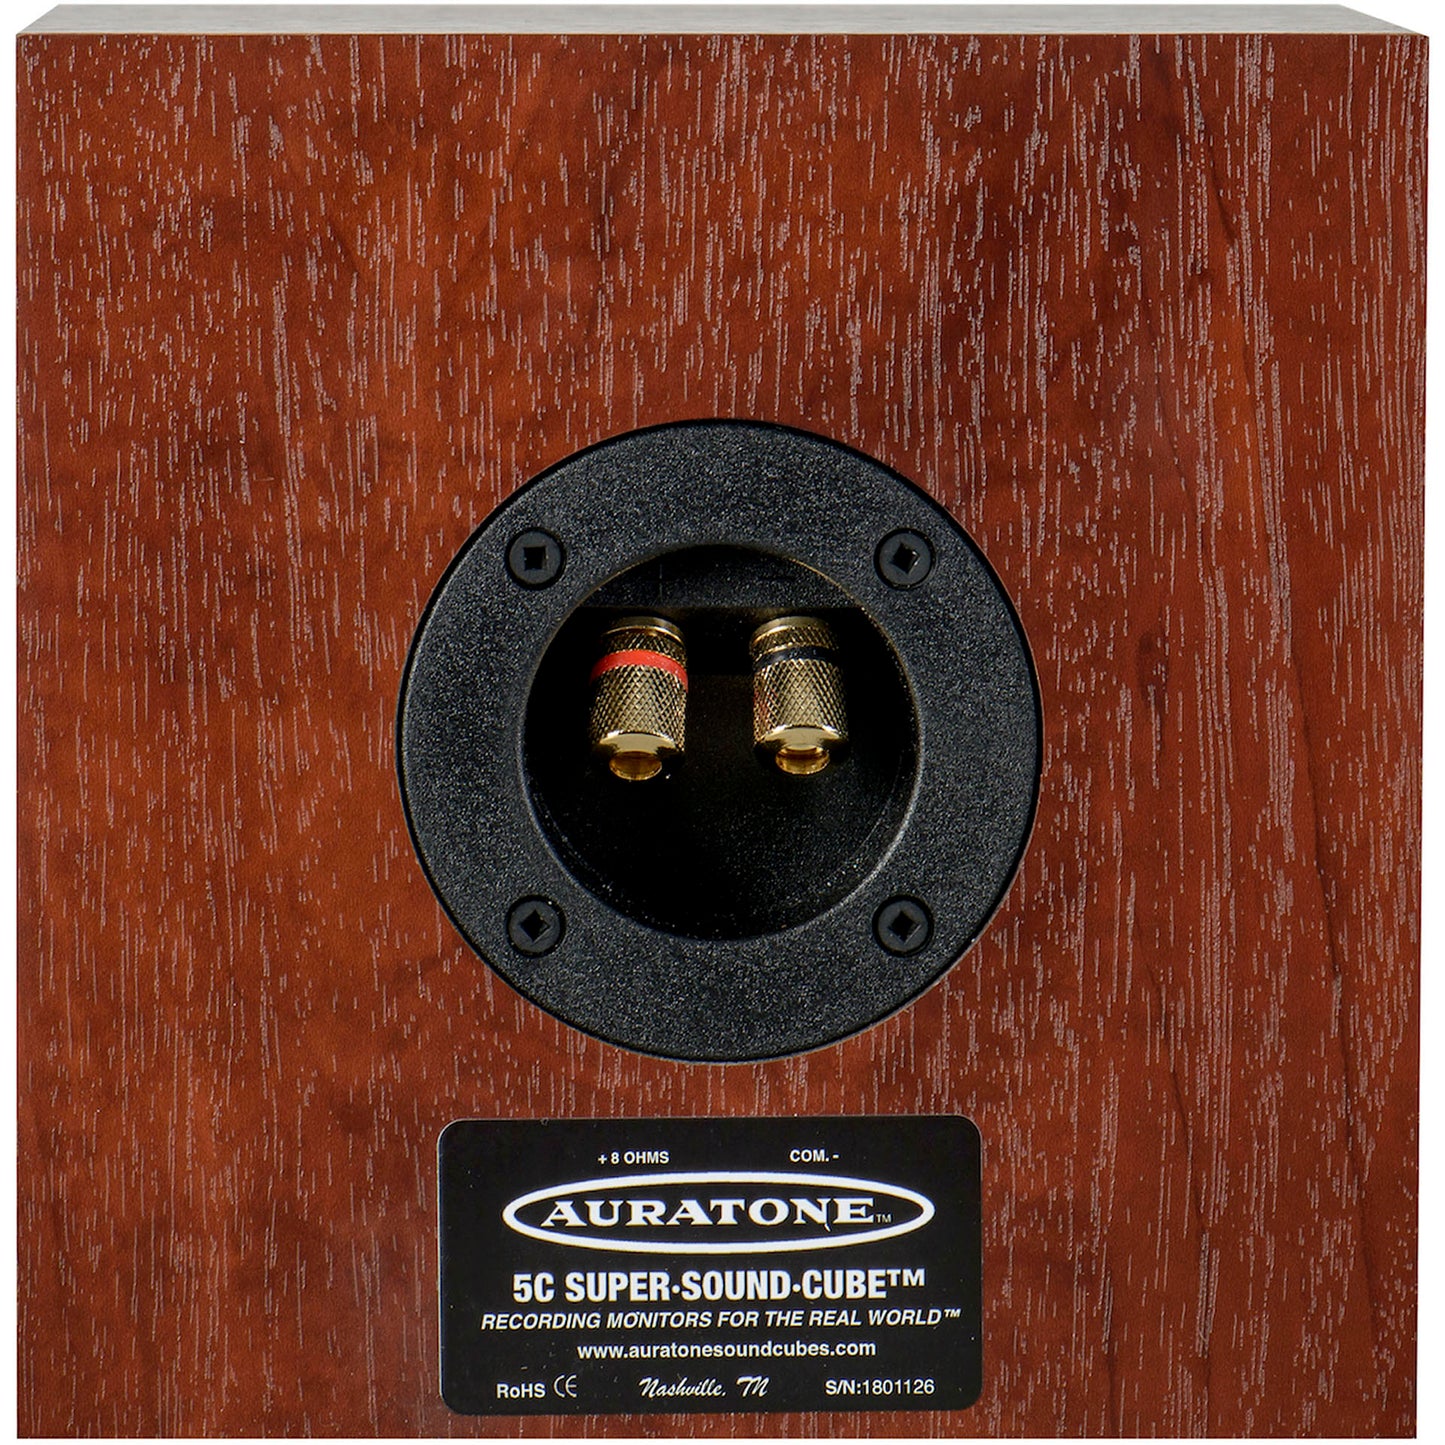 Auratone Bundle with 5C Woodgrain Pair with A2-30 Amp